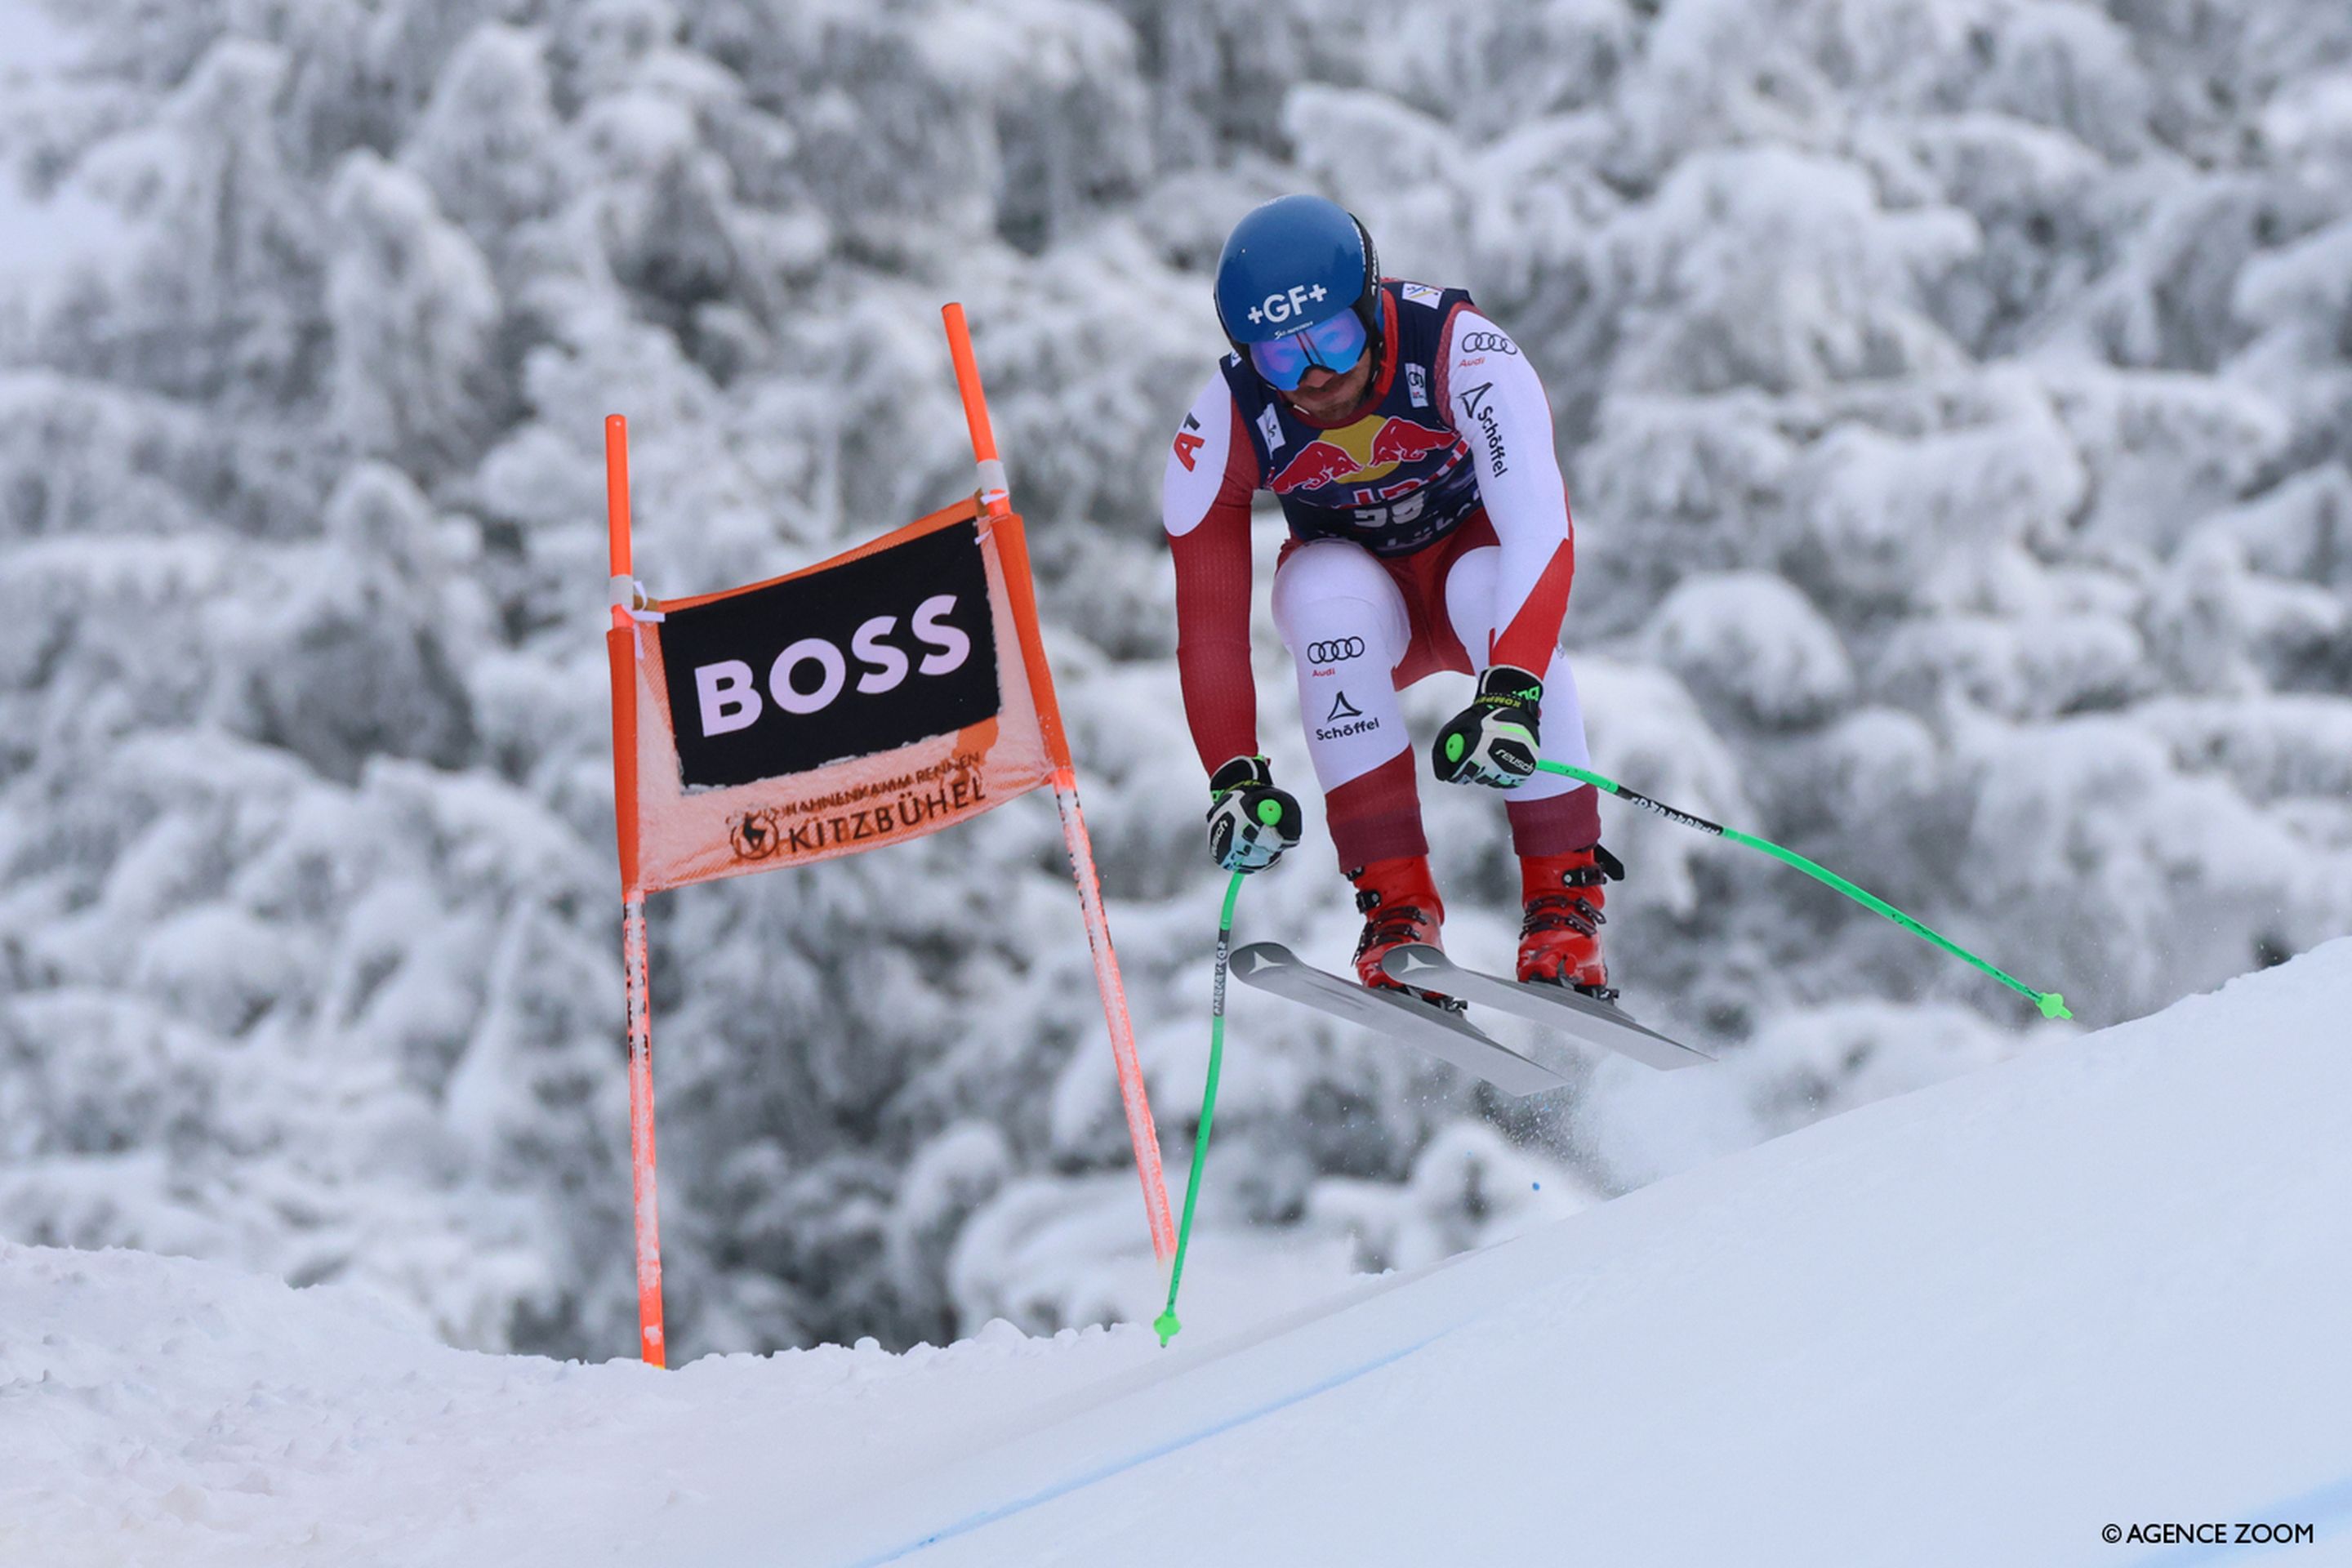 Manuel Traninger (AUT) in downhill training on the famous Streif course in Kitzbuehel